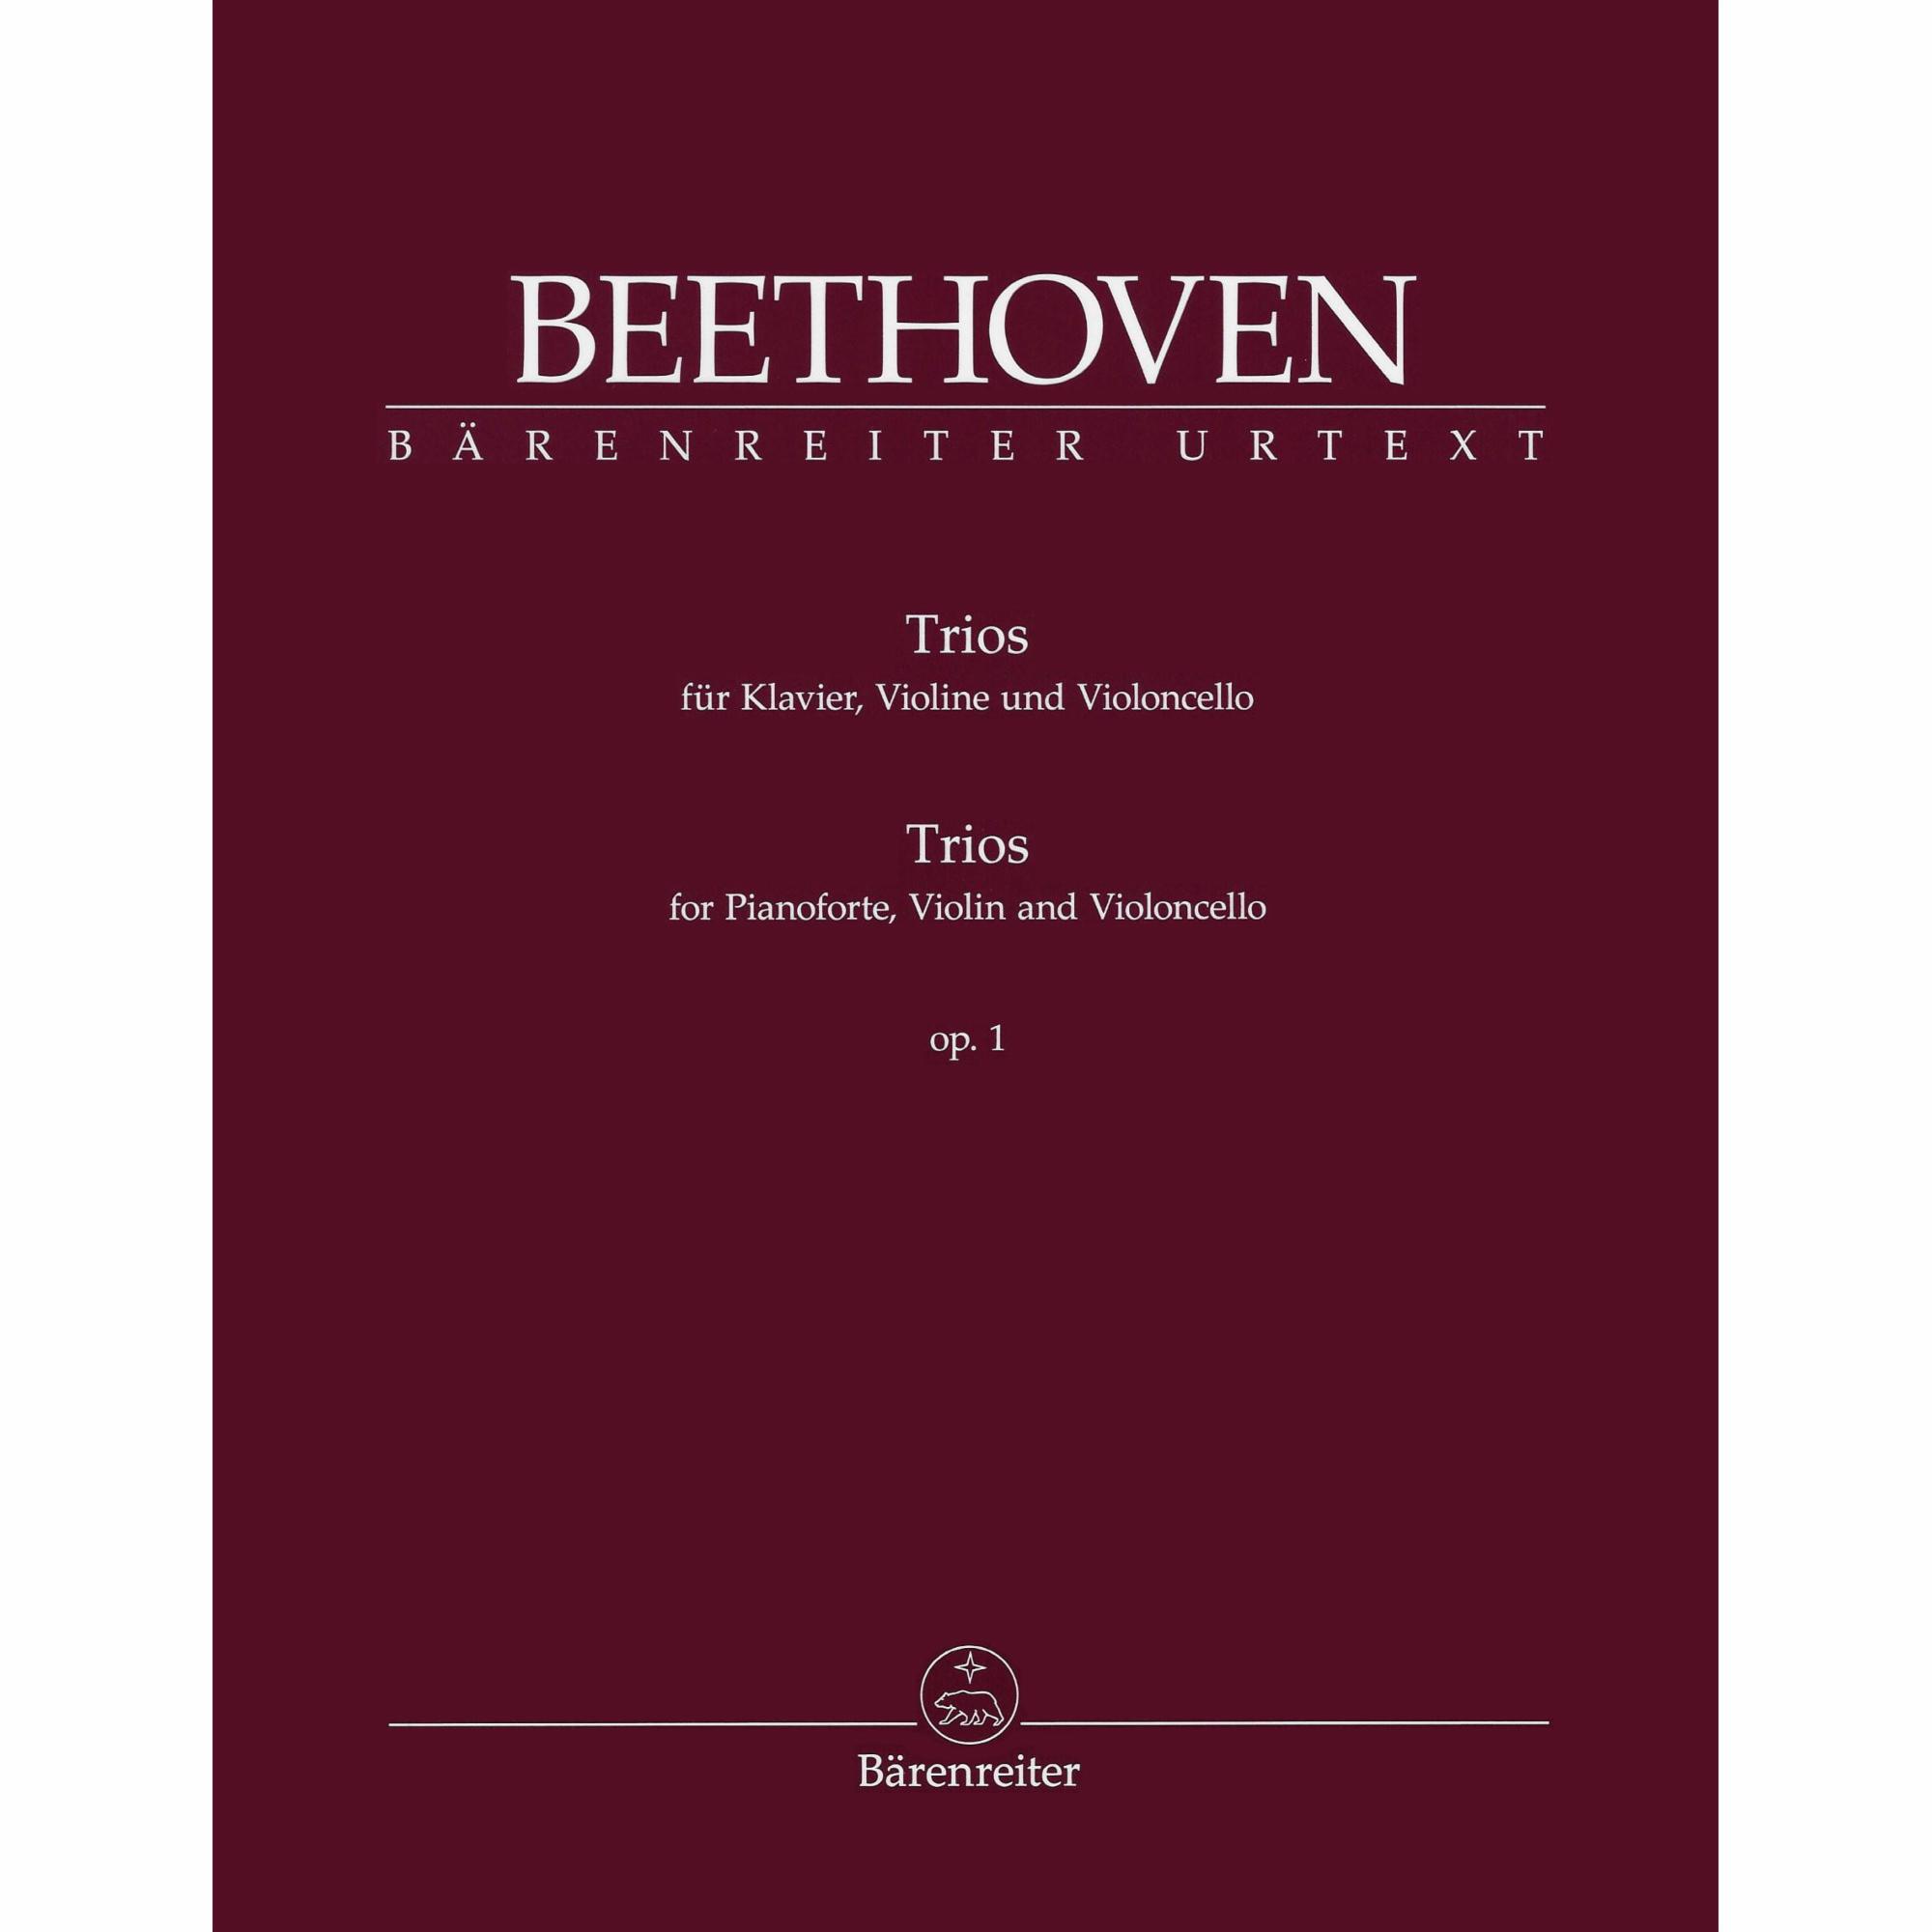 Beethoven -- Trios, Op. 1 for Violin, Cello, and Piano